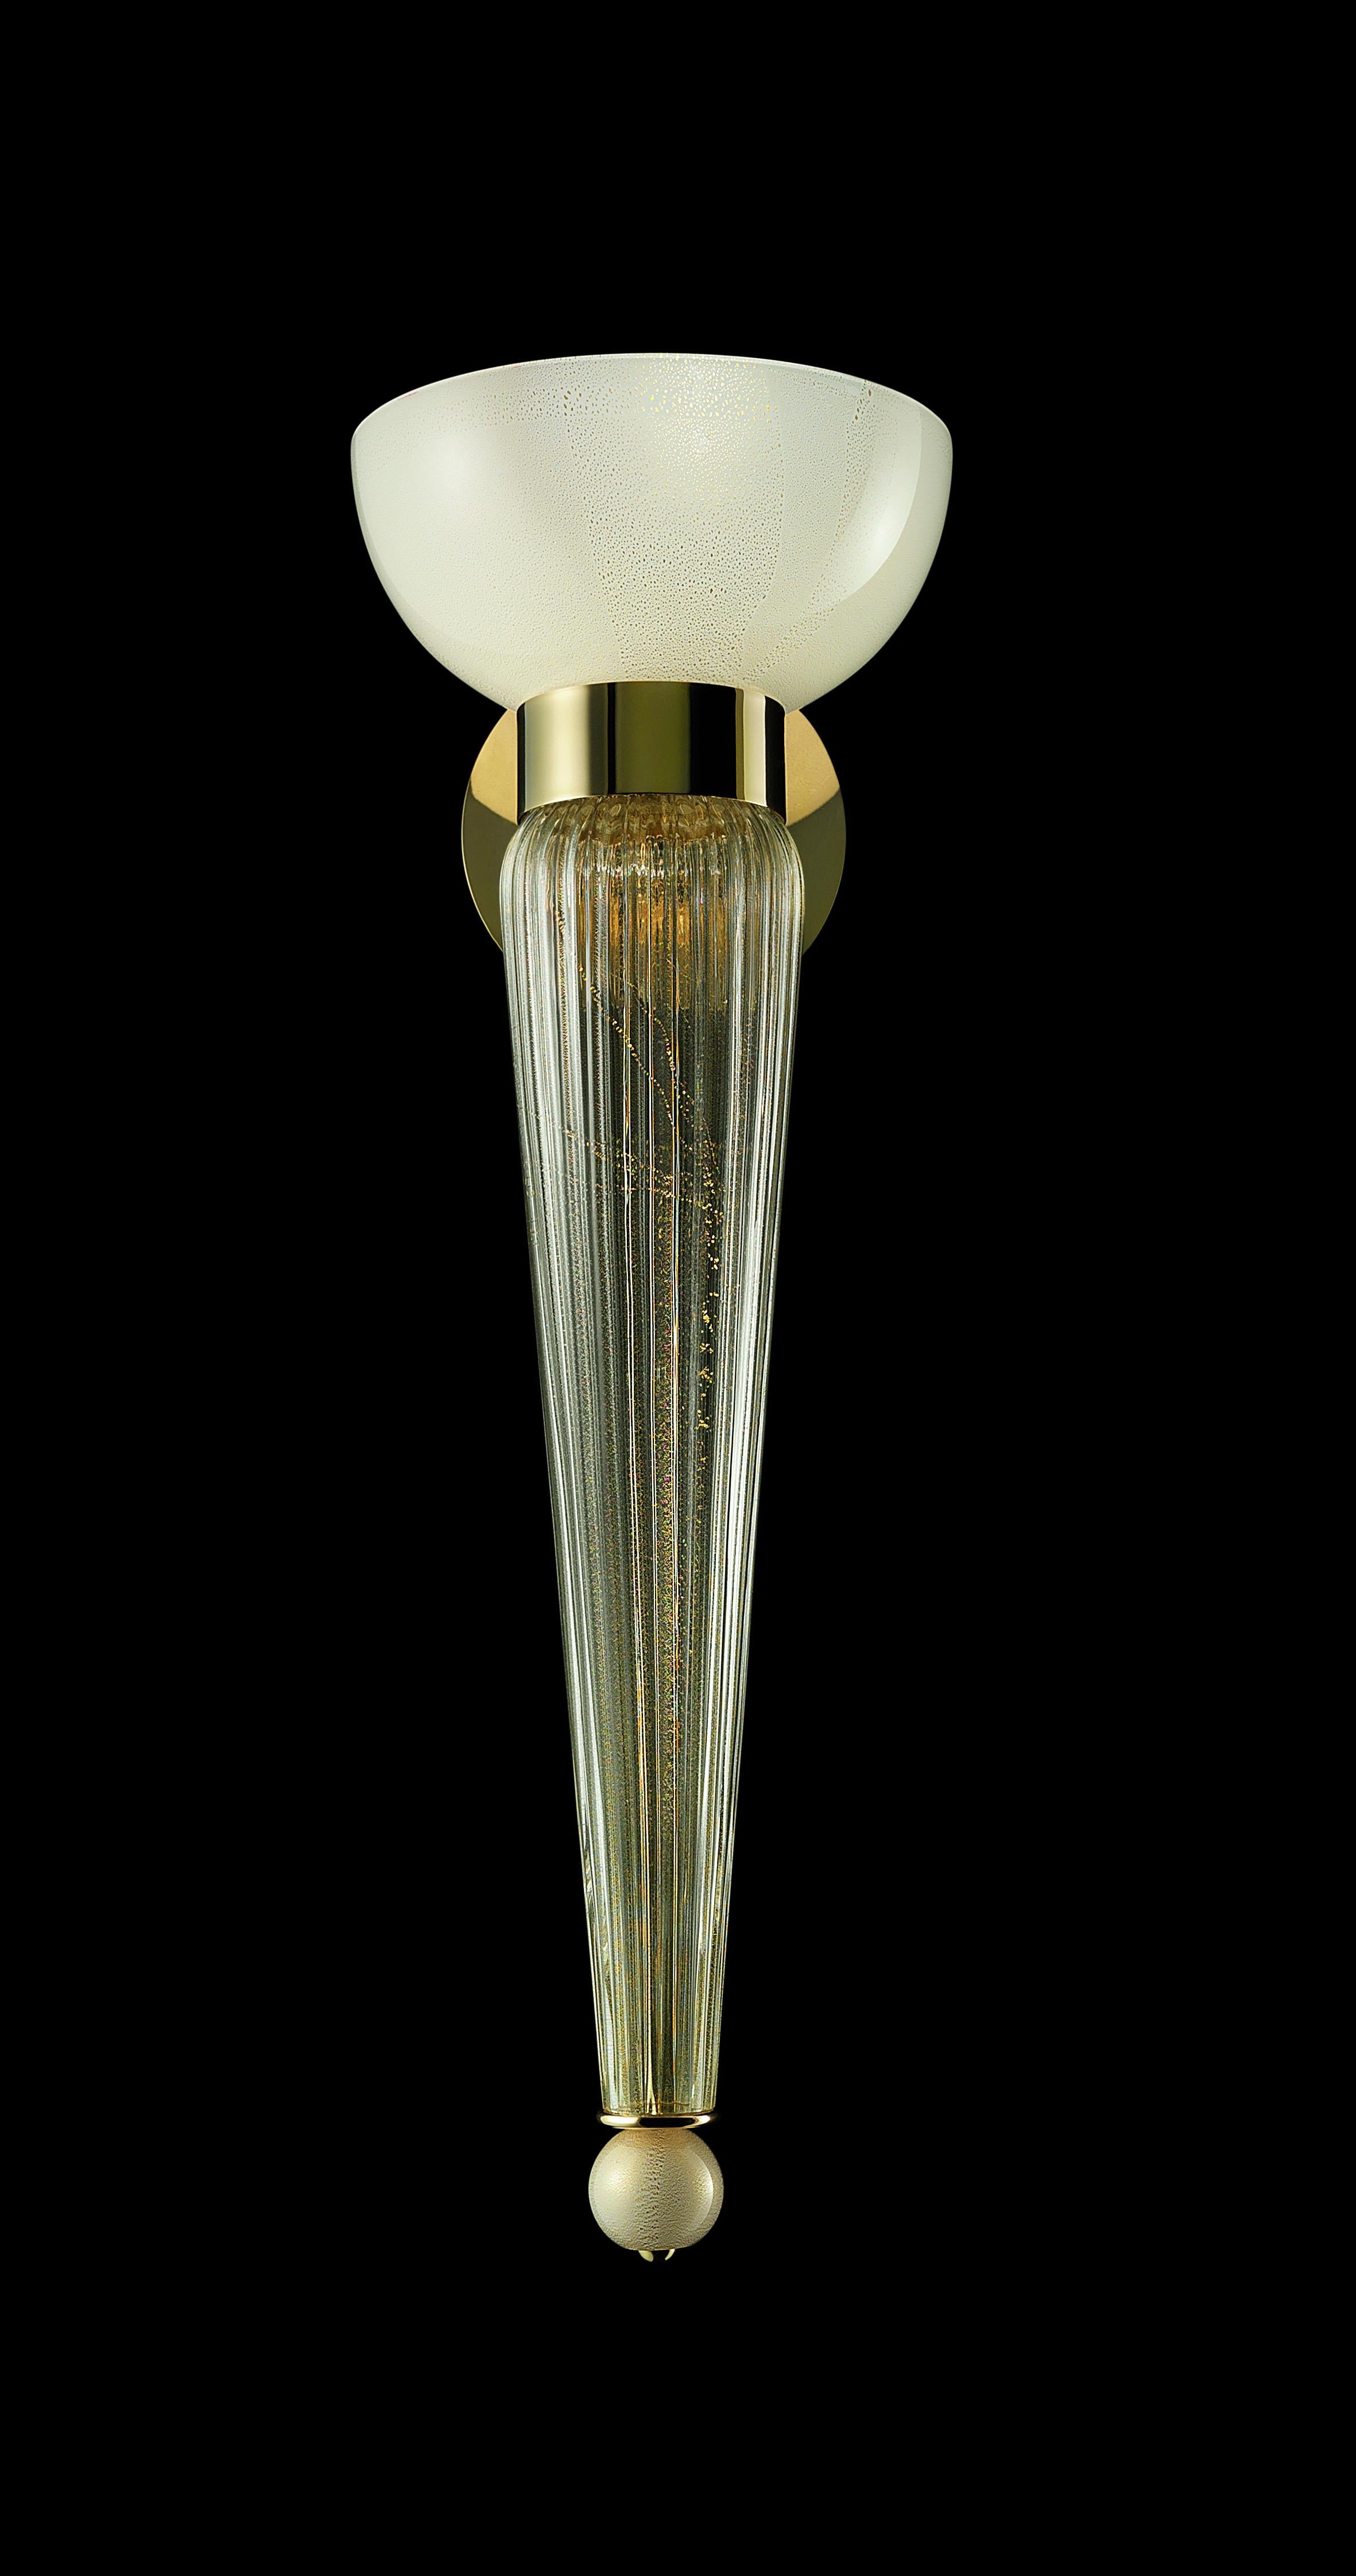 Beige (Beige Gold_OB) Torvik 5656 Wall Sconce in Glass with Galvanized Gold Finish, by Barovier&Toso 3